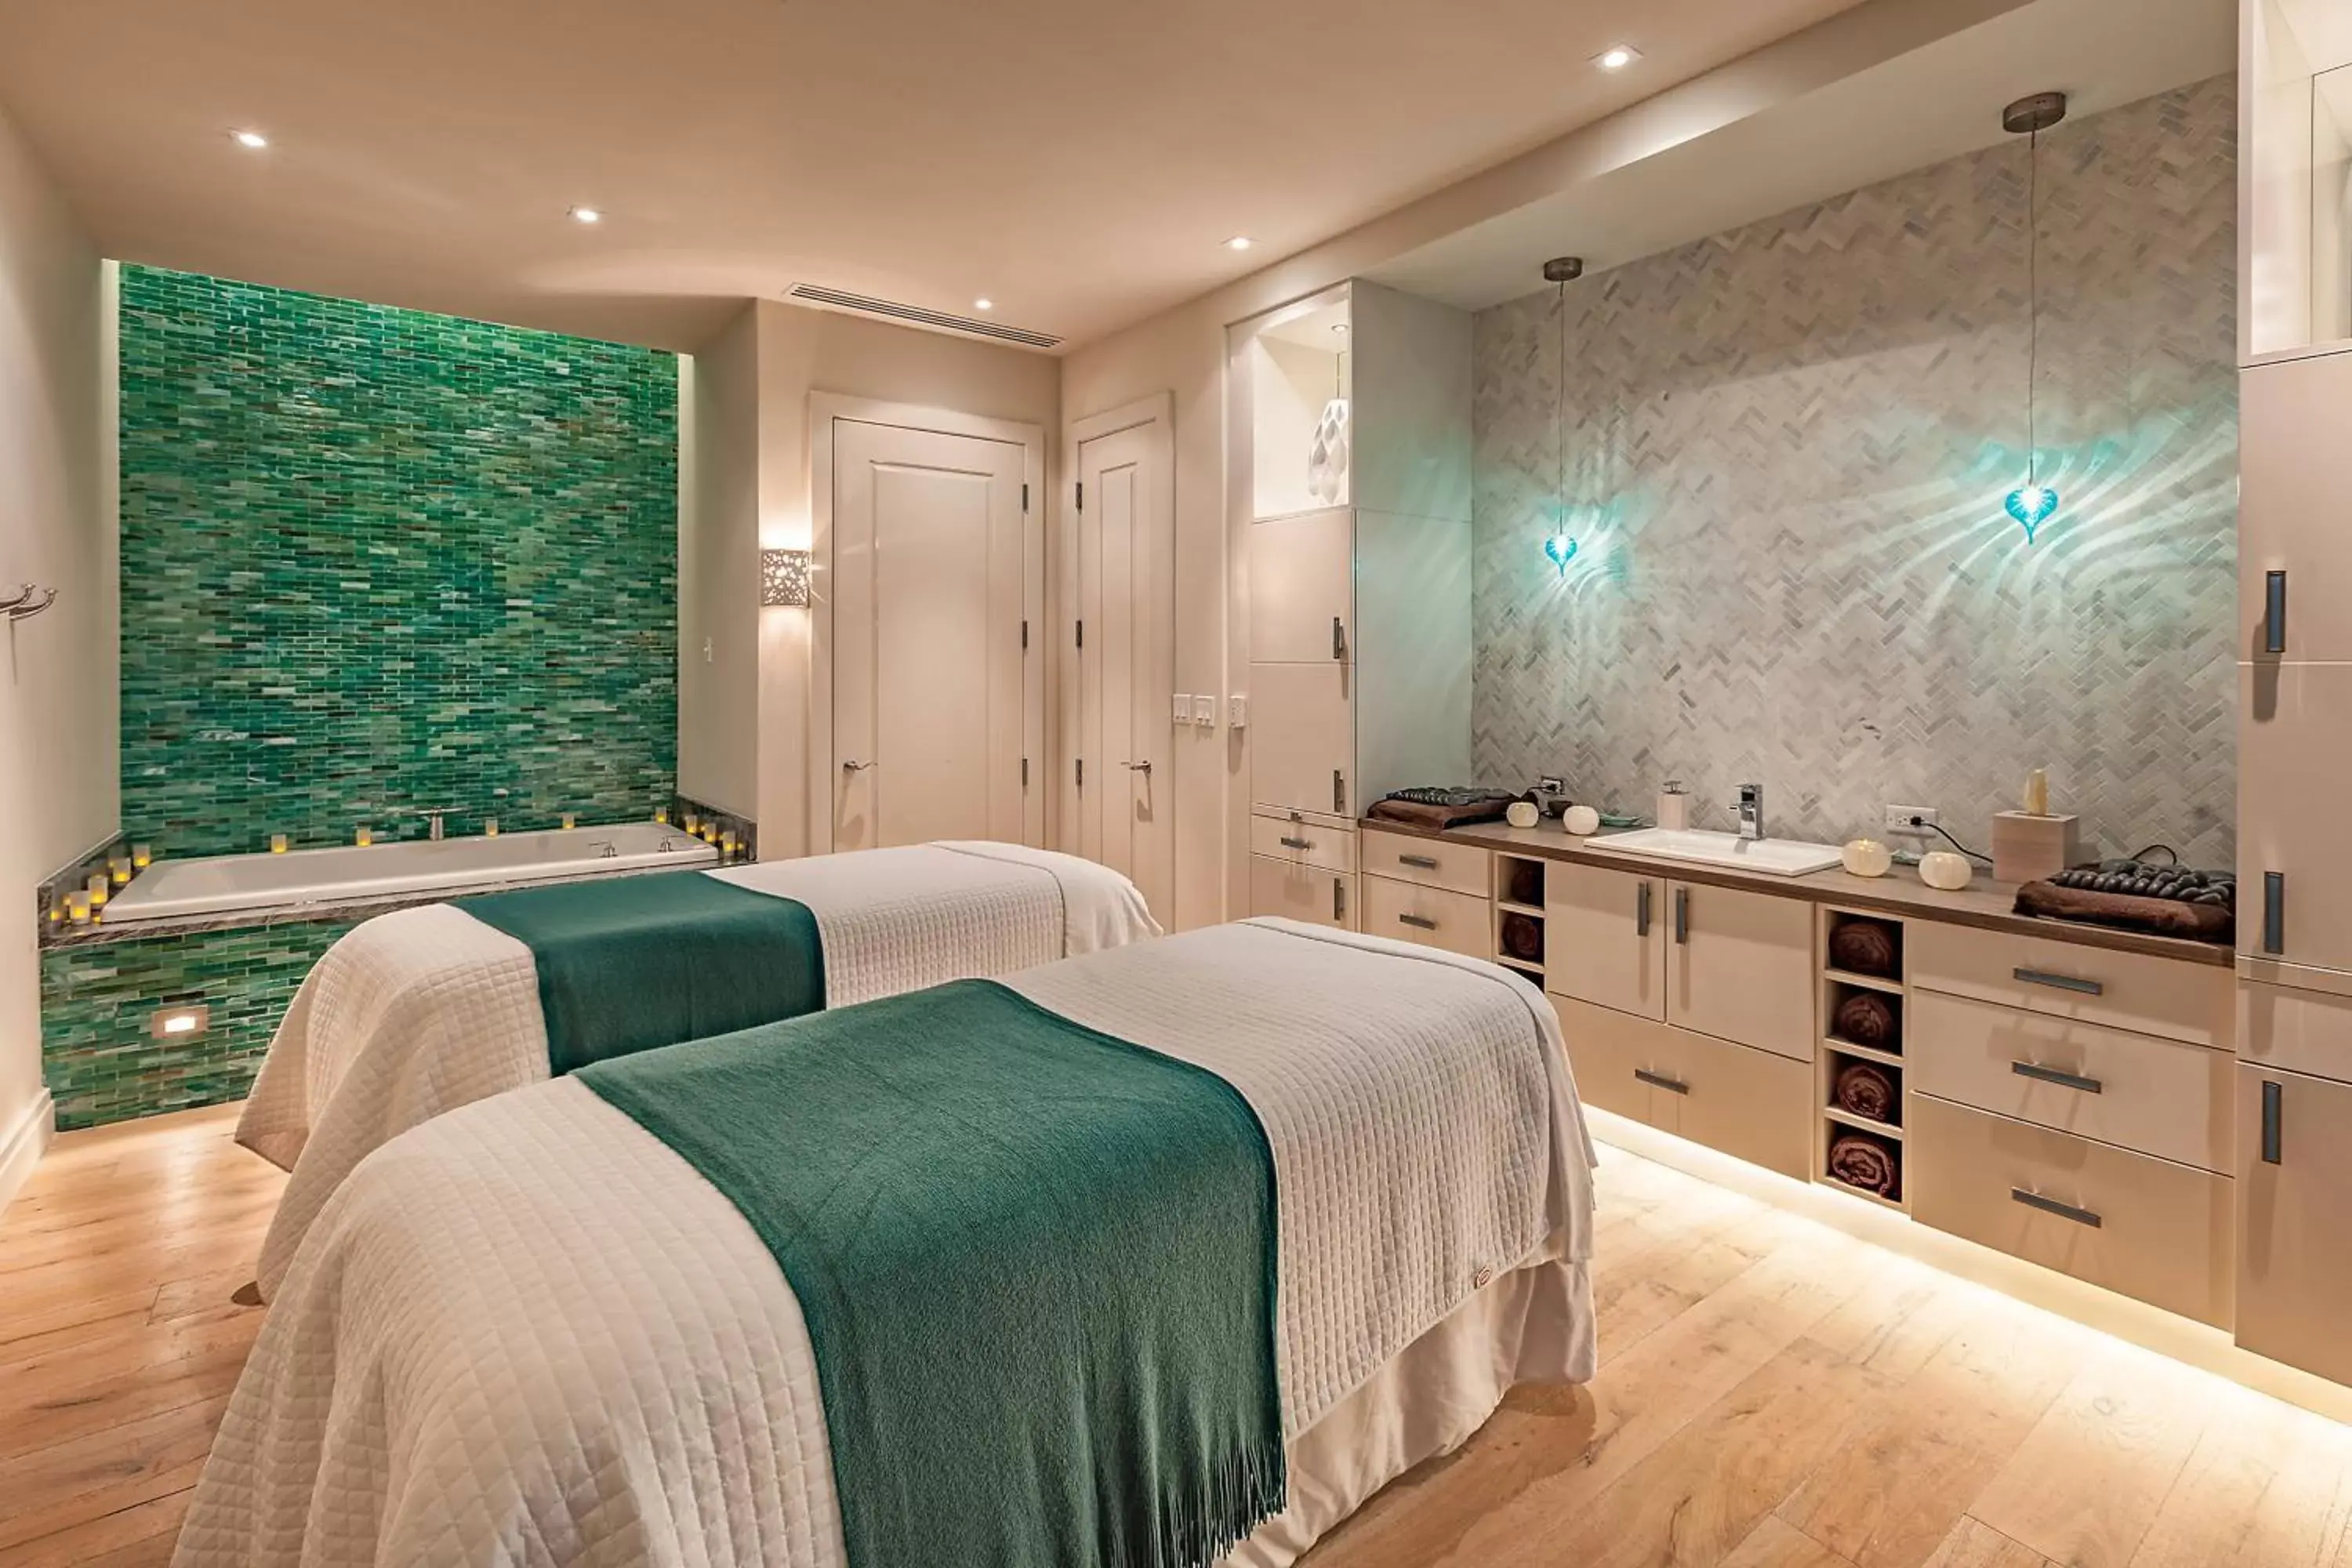 Spa and wellness centre/facilities, Spa/Wellness in Grand Bohemian Hotel Mountain Brook, Autograph Collection